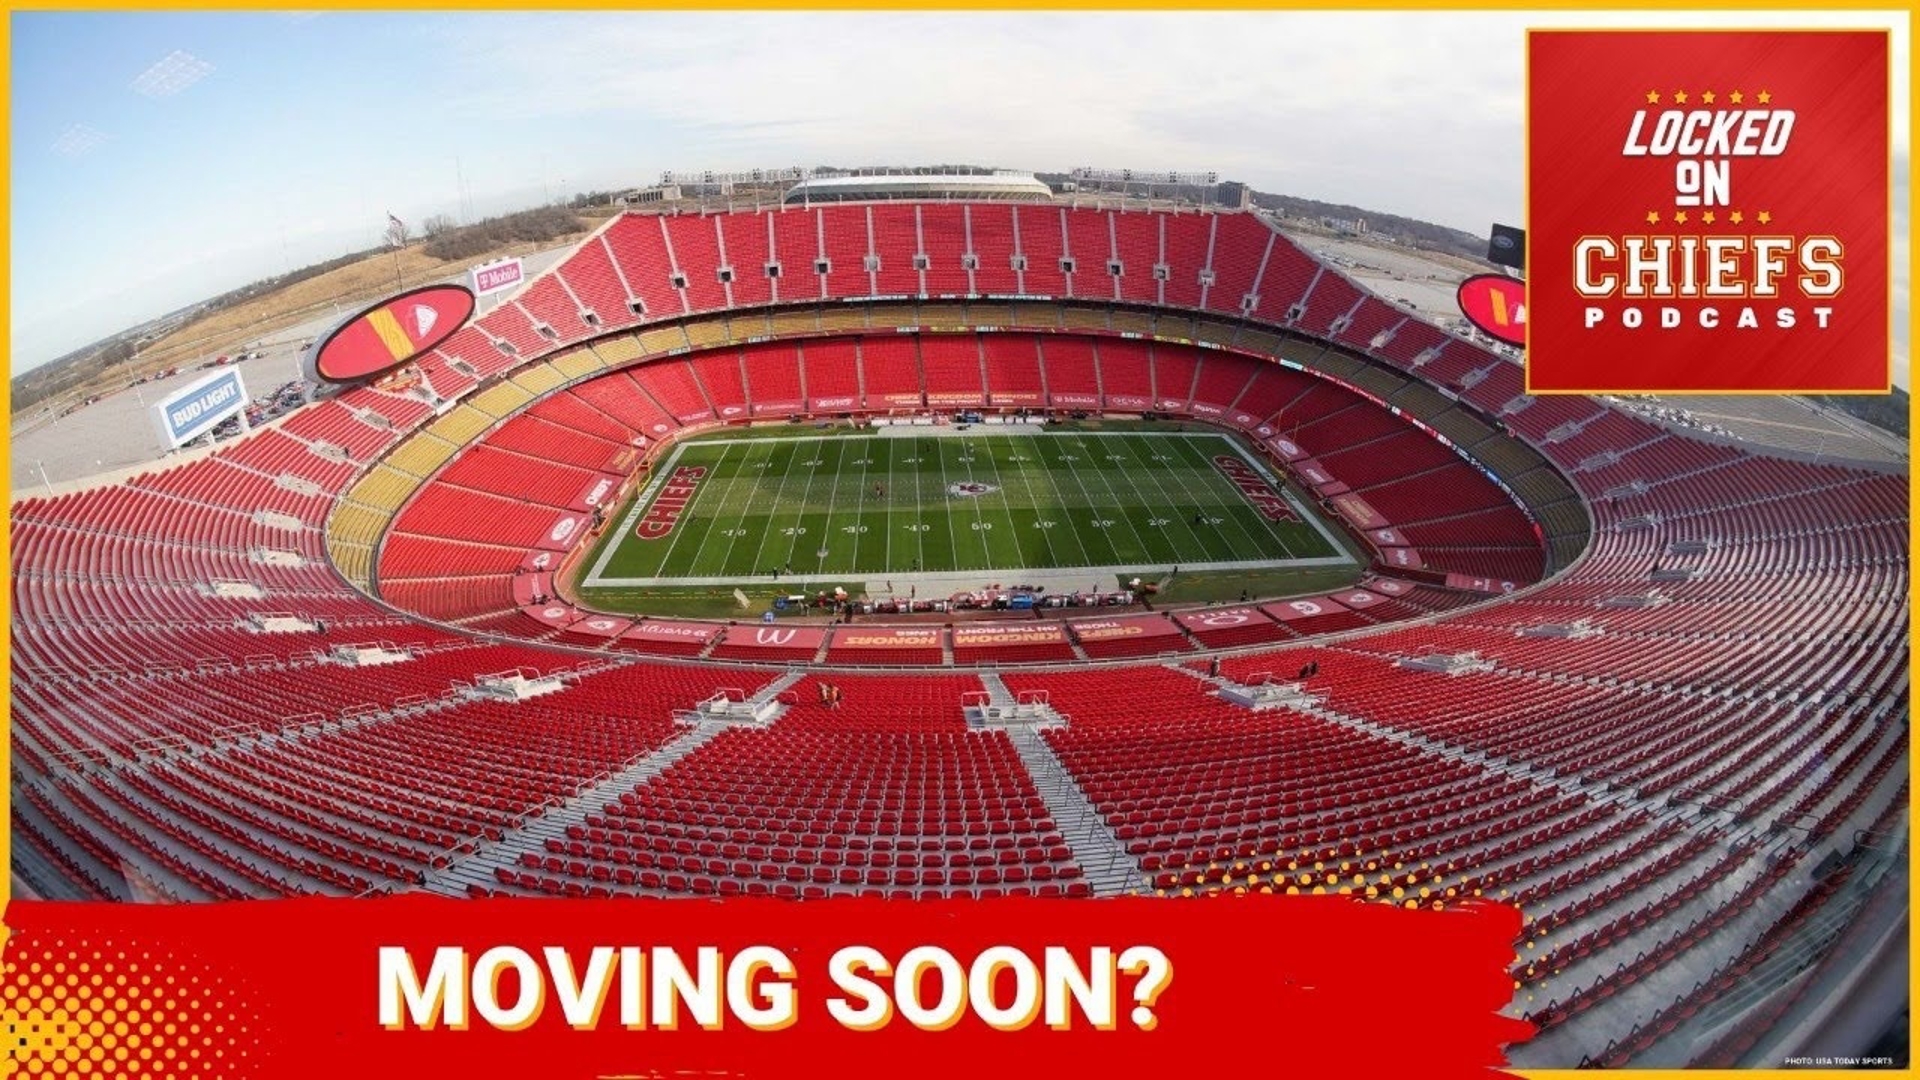 The Kansas City Chiefs took a big step closer to moving across state lines with the approval of STAR bonds for a new stadium in Kansas.